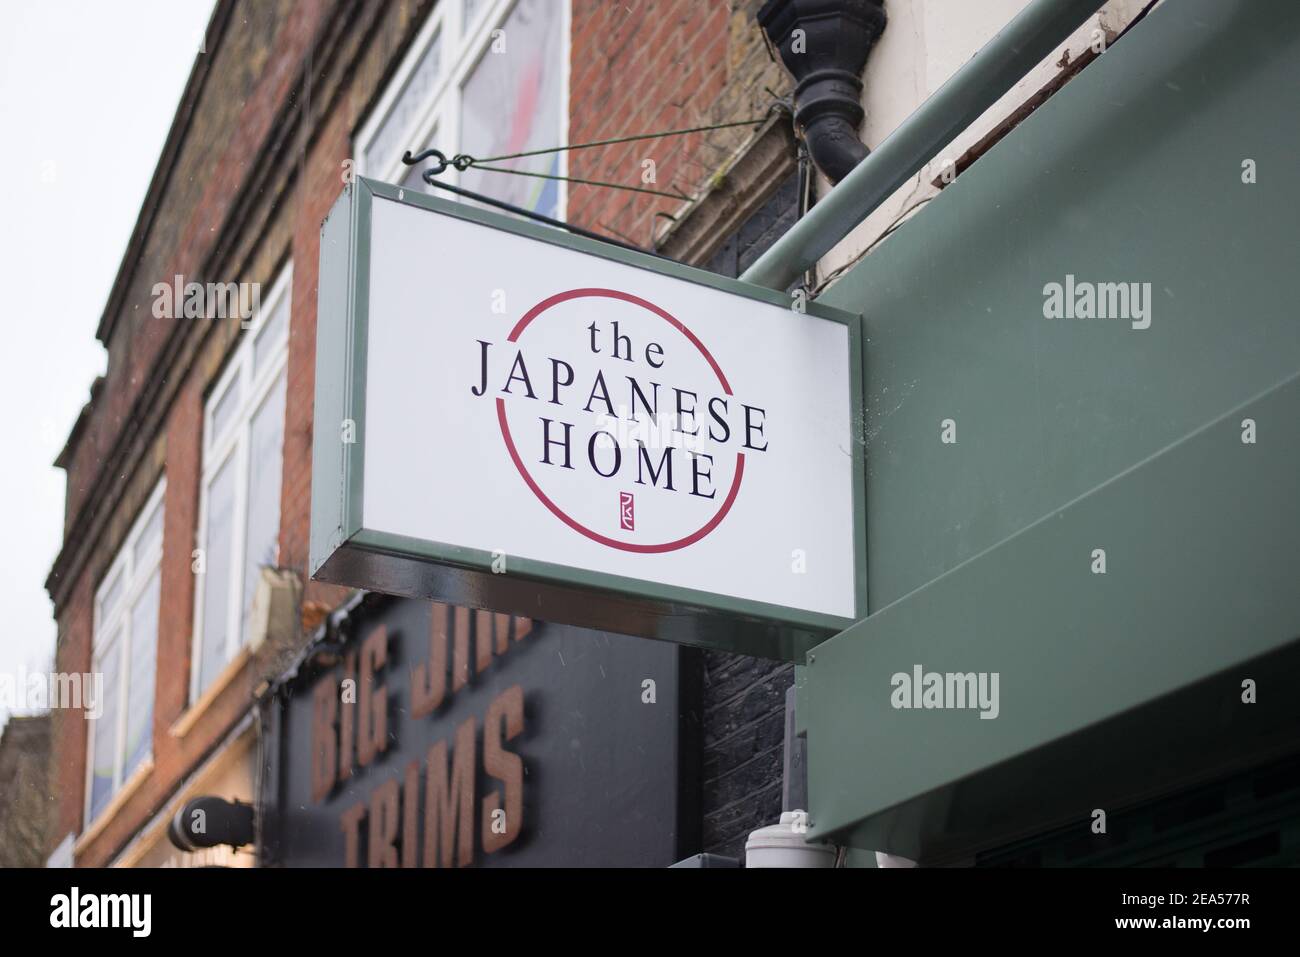 Logo Shop Schild Store Brand Branding Front Retail Retailer Company High Quality The Japanese Home, 171 Chiswick High Road, Chiswick, London W4 2DR Stockfoto